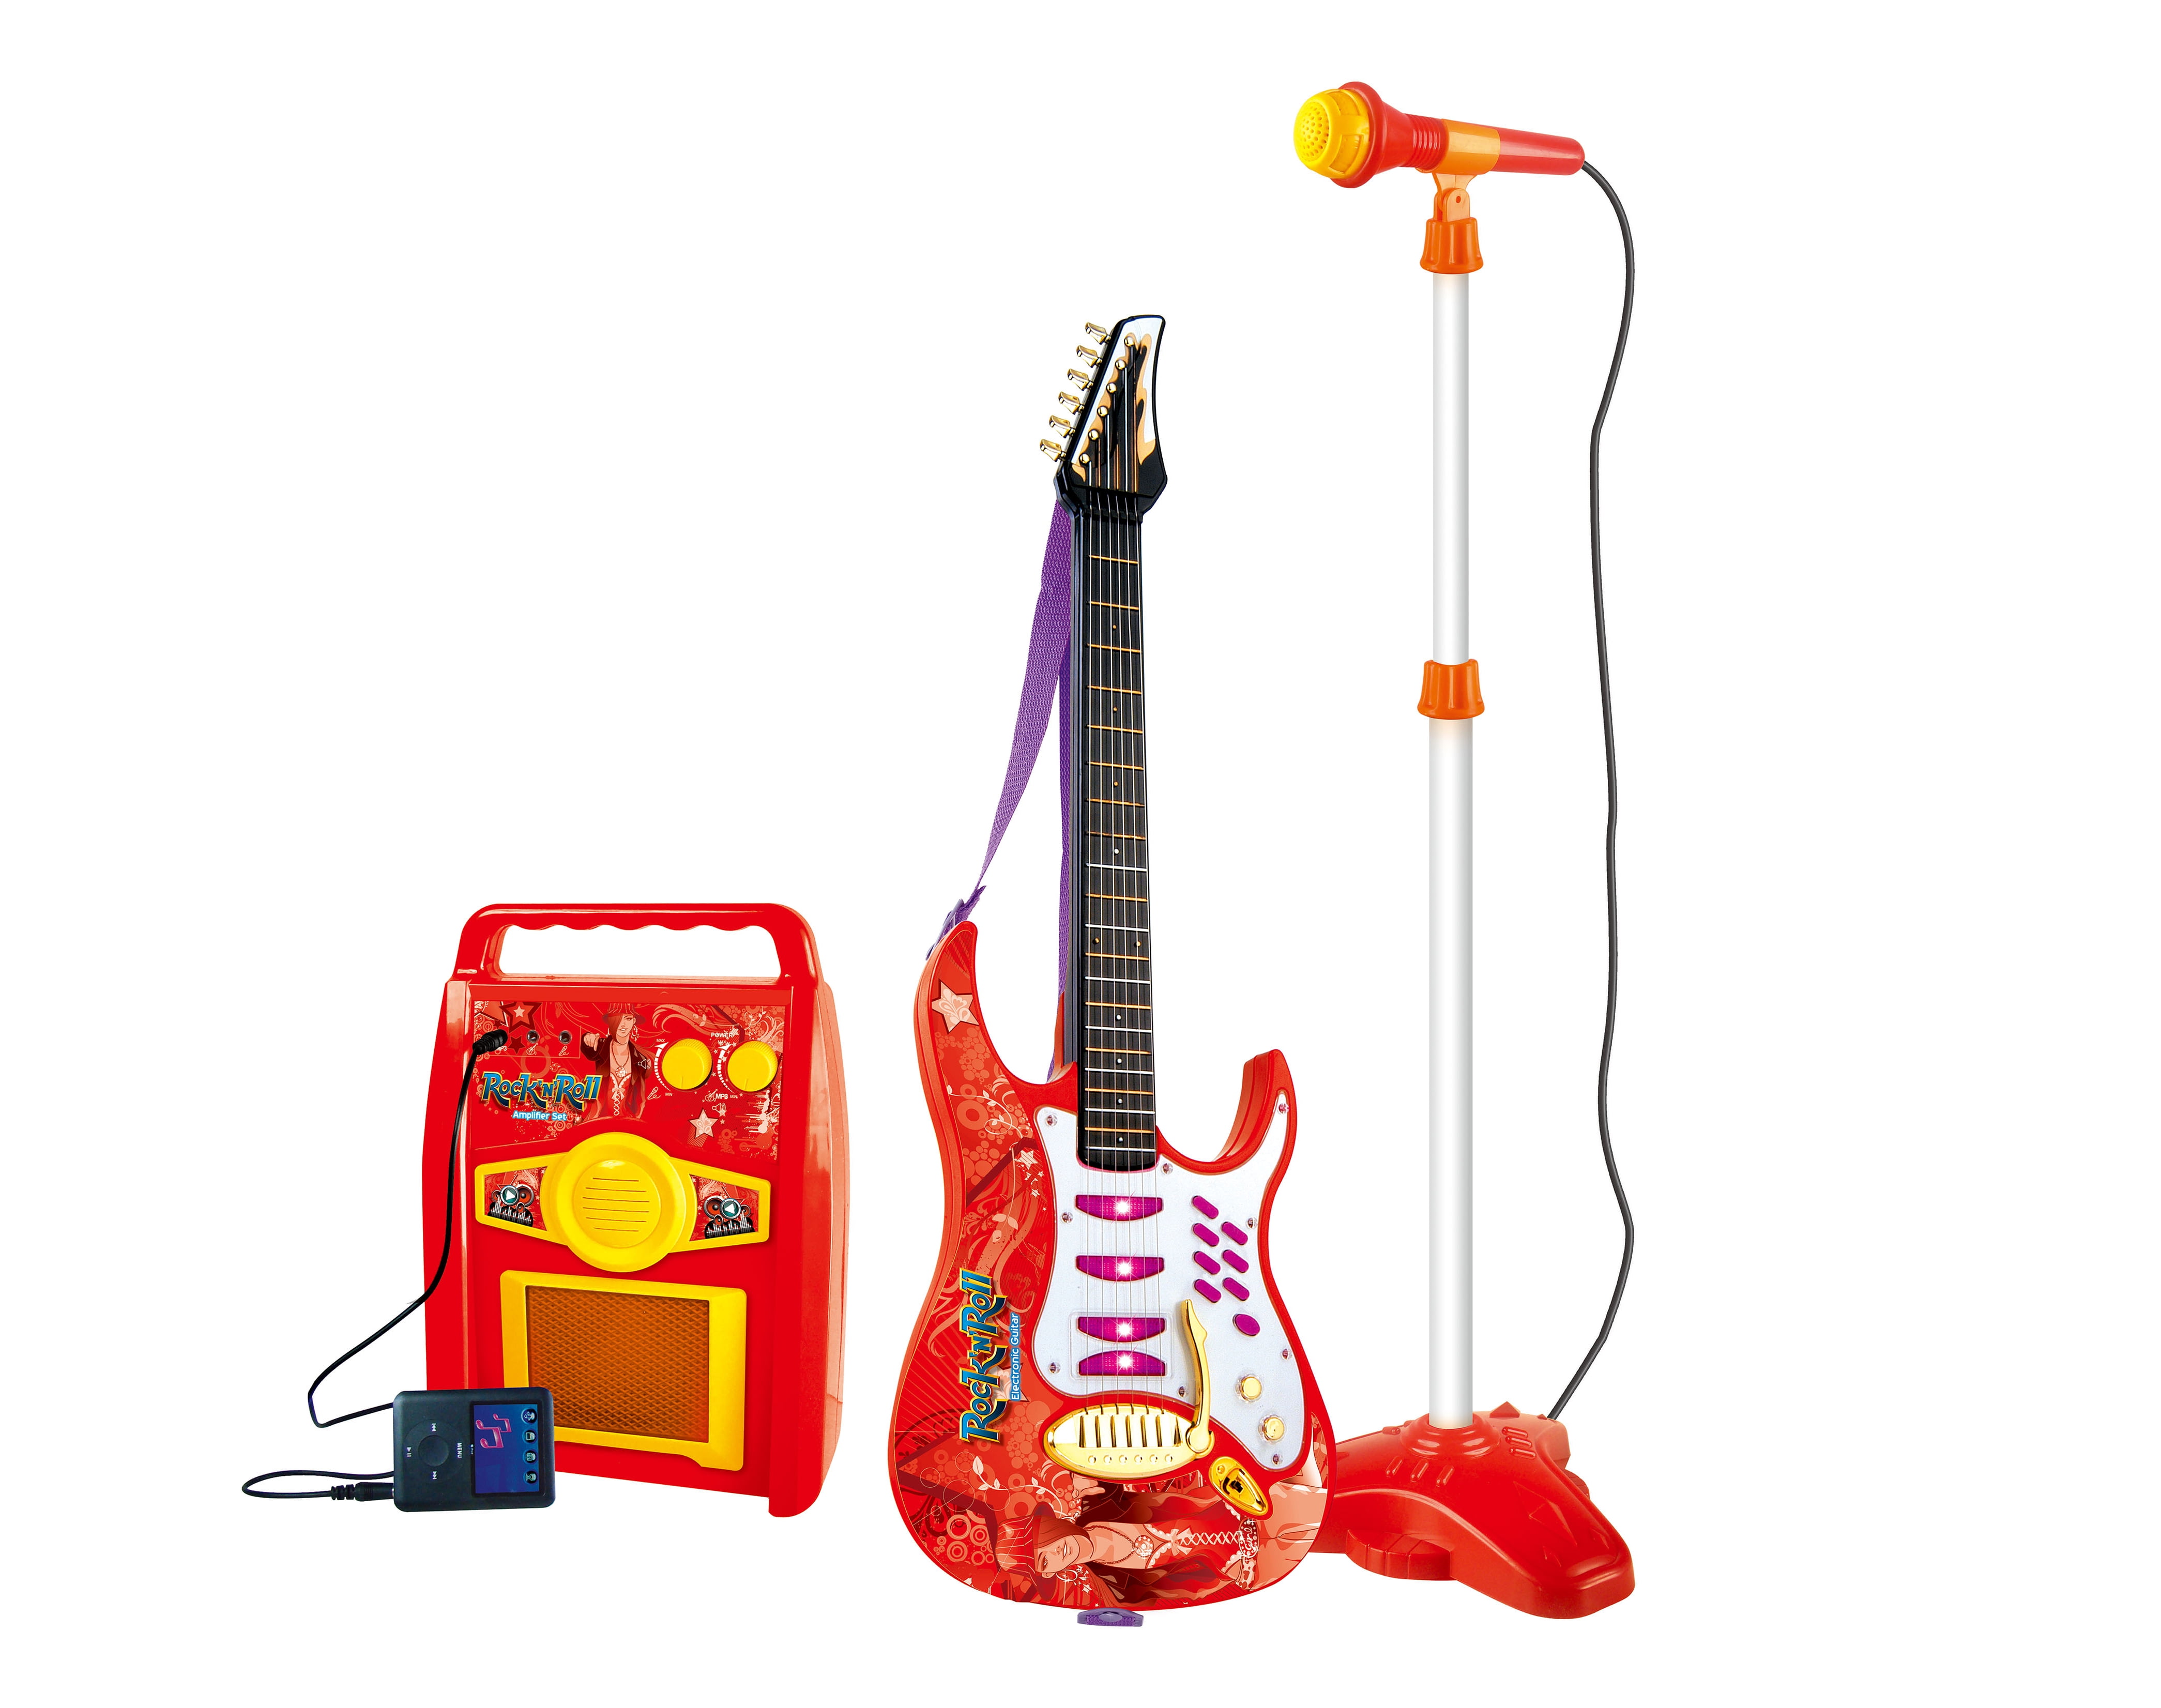 Children's toy electric guitar input mp3 microphone with stand amplifier 